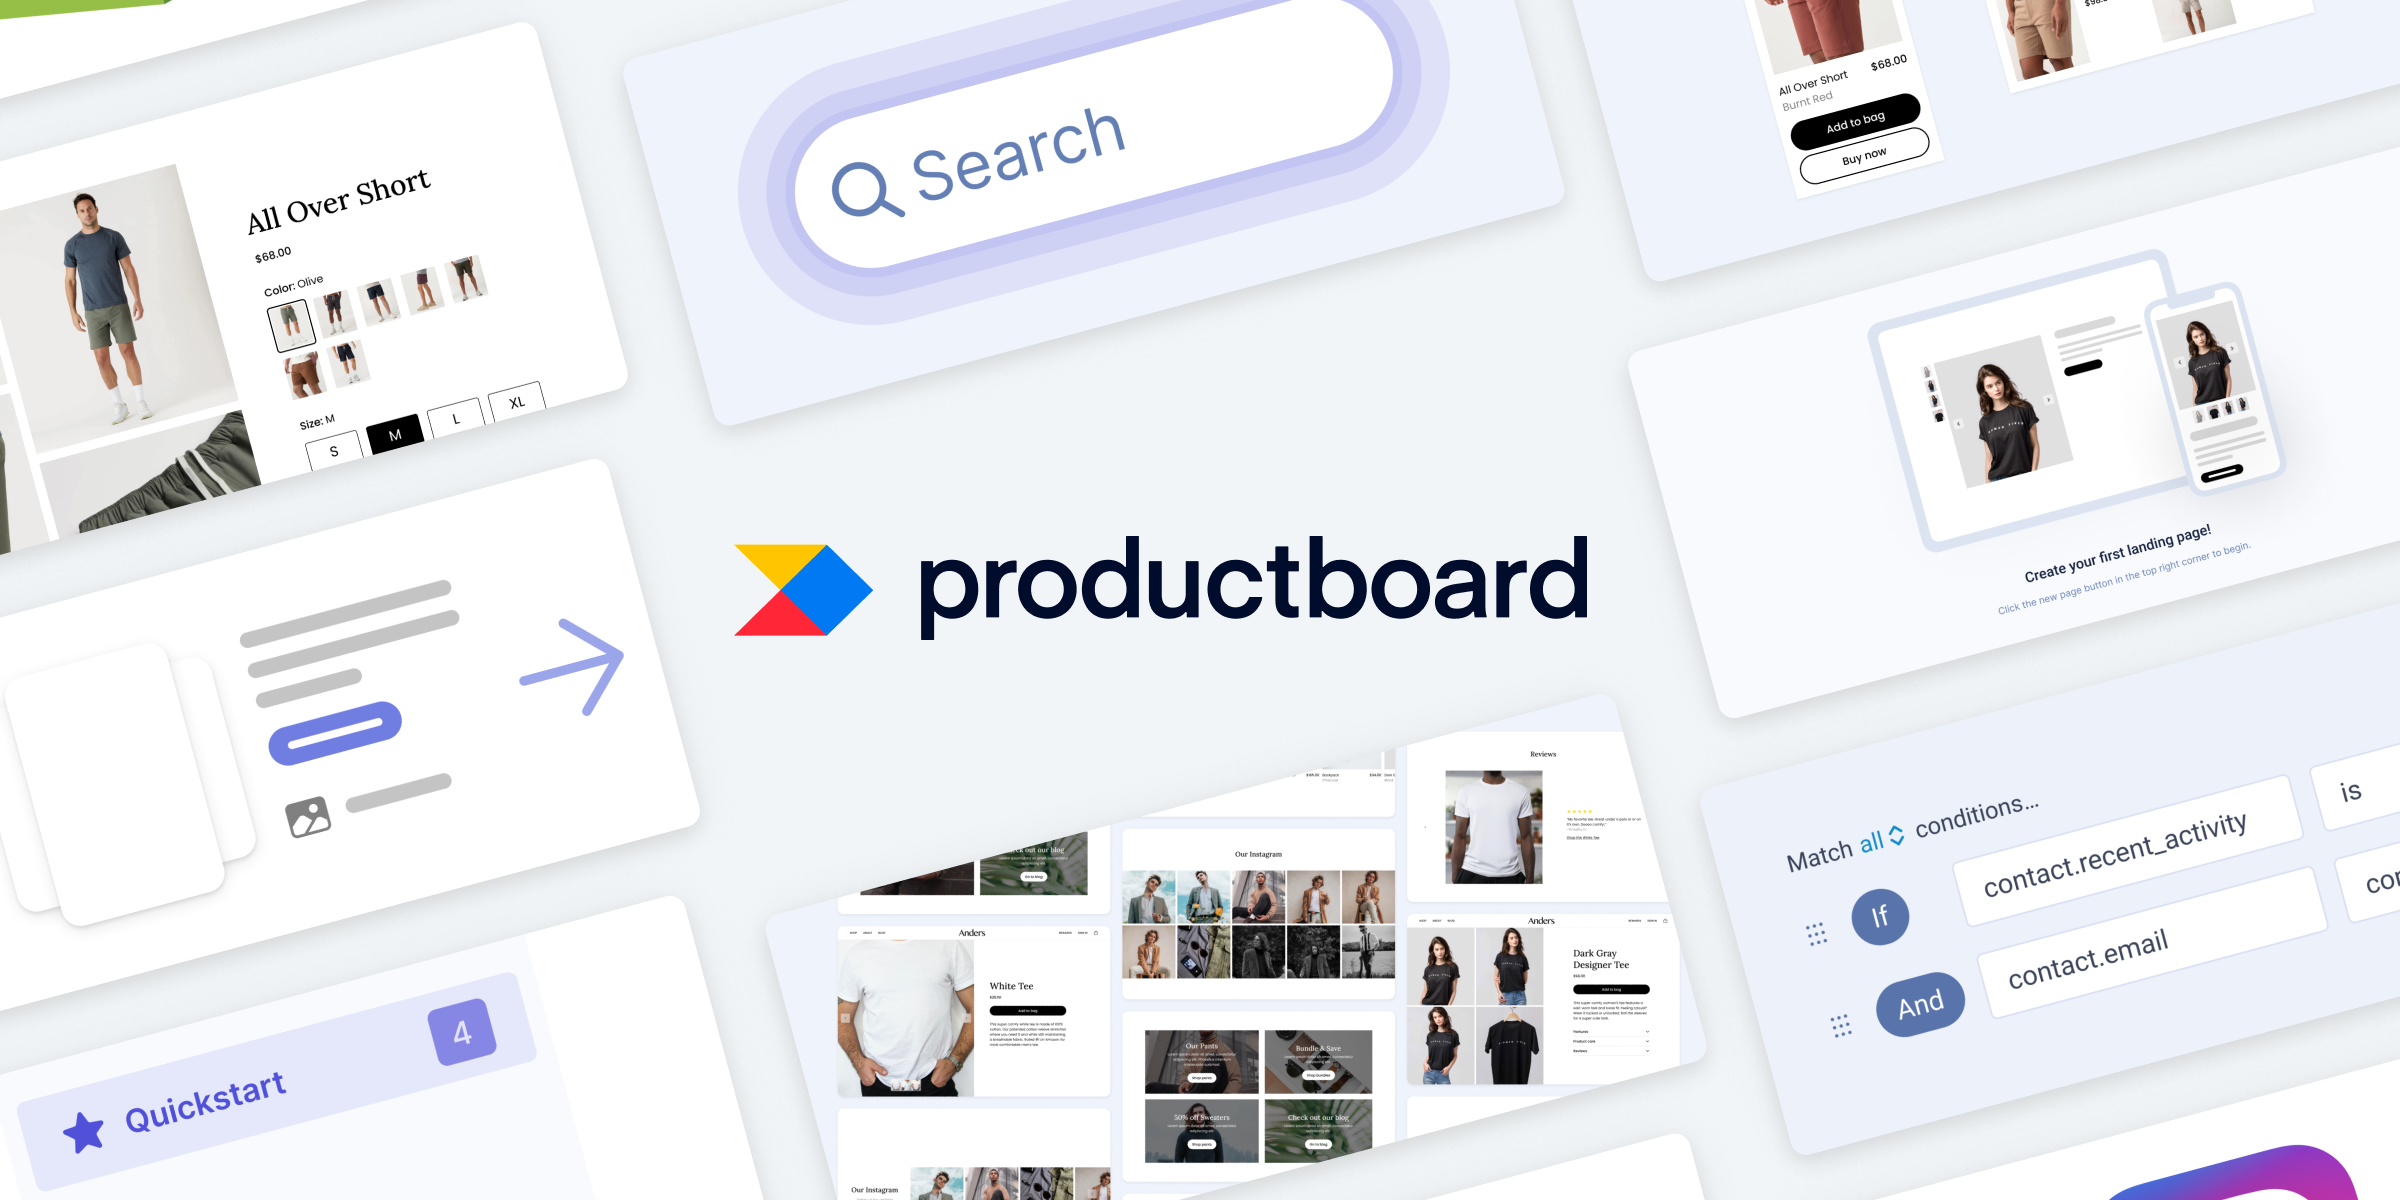 Introducing ProductBoard!